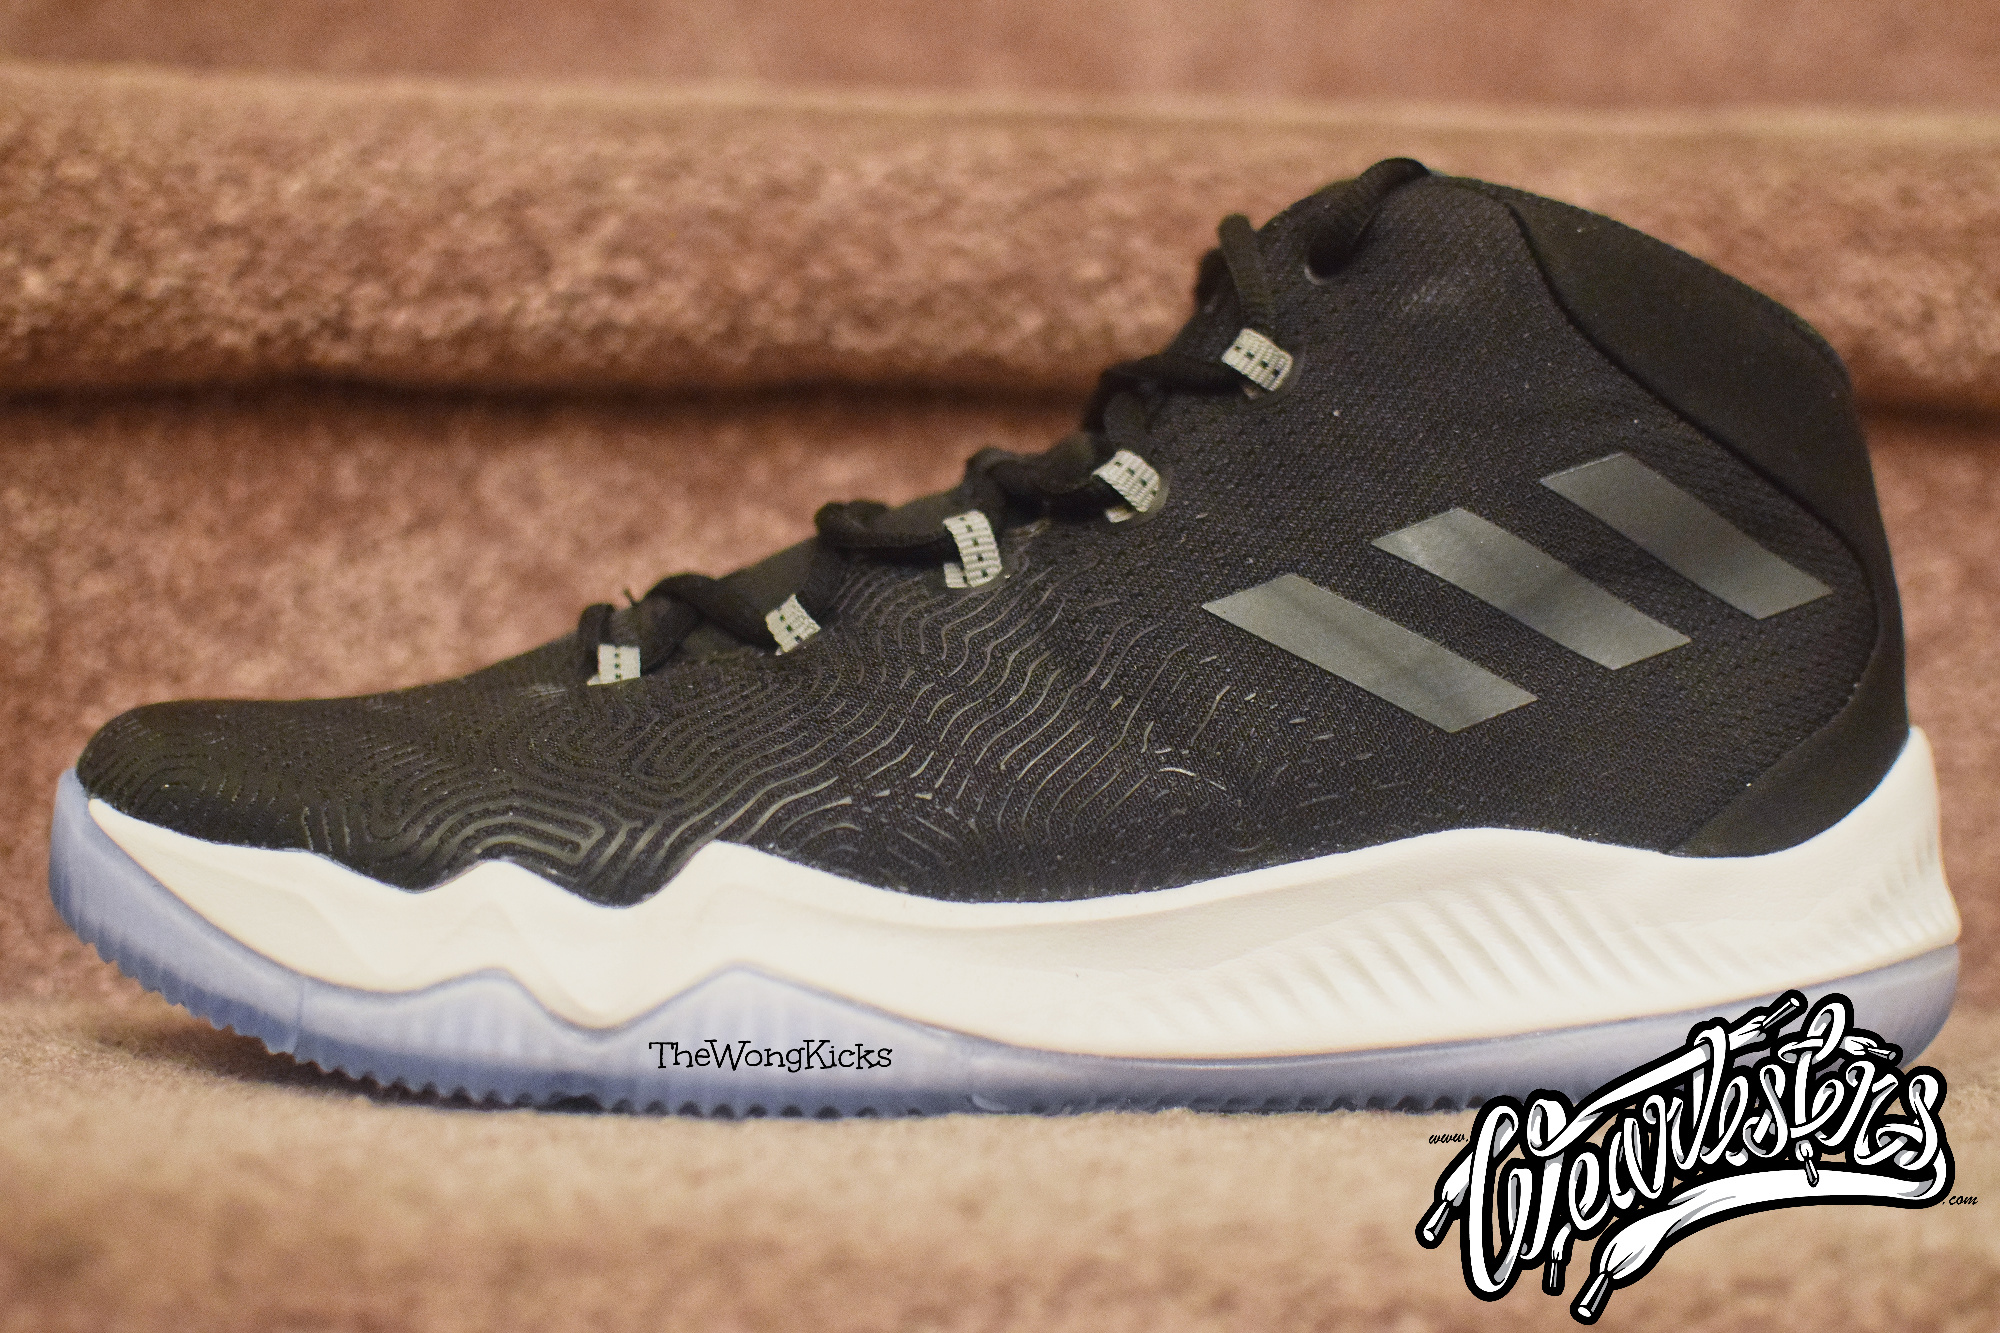 adidas Crazy Hustle - Detailed Look and First Impressions - WearTesters